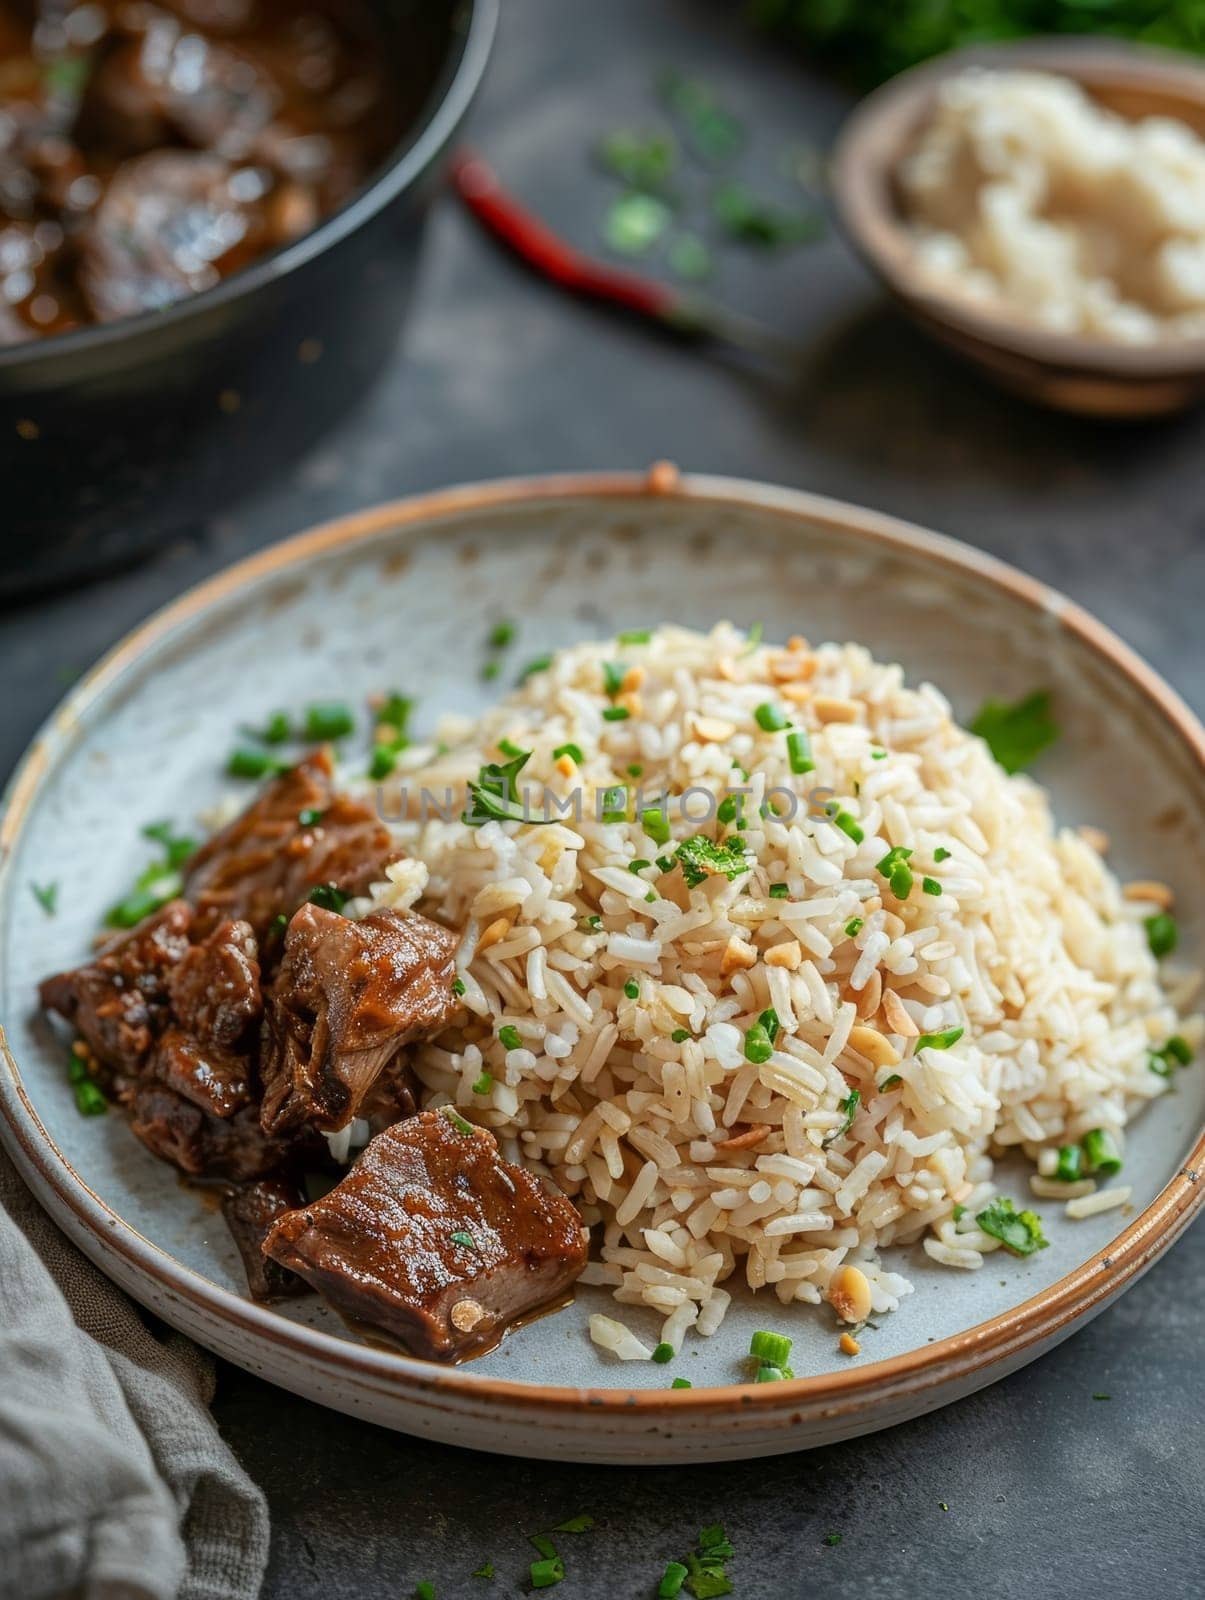 Zimbabwean peanut butter rice, a traditional dish cooked with peanut butter and served with a hearty meat stew, presented on a plate. by sfinks